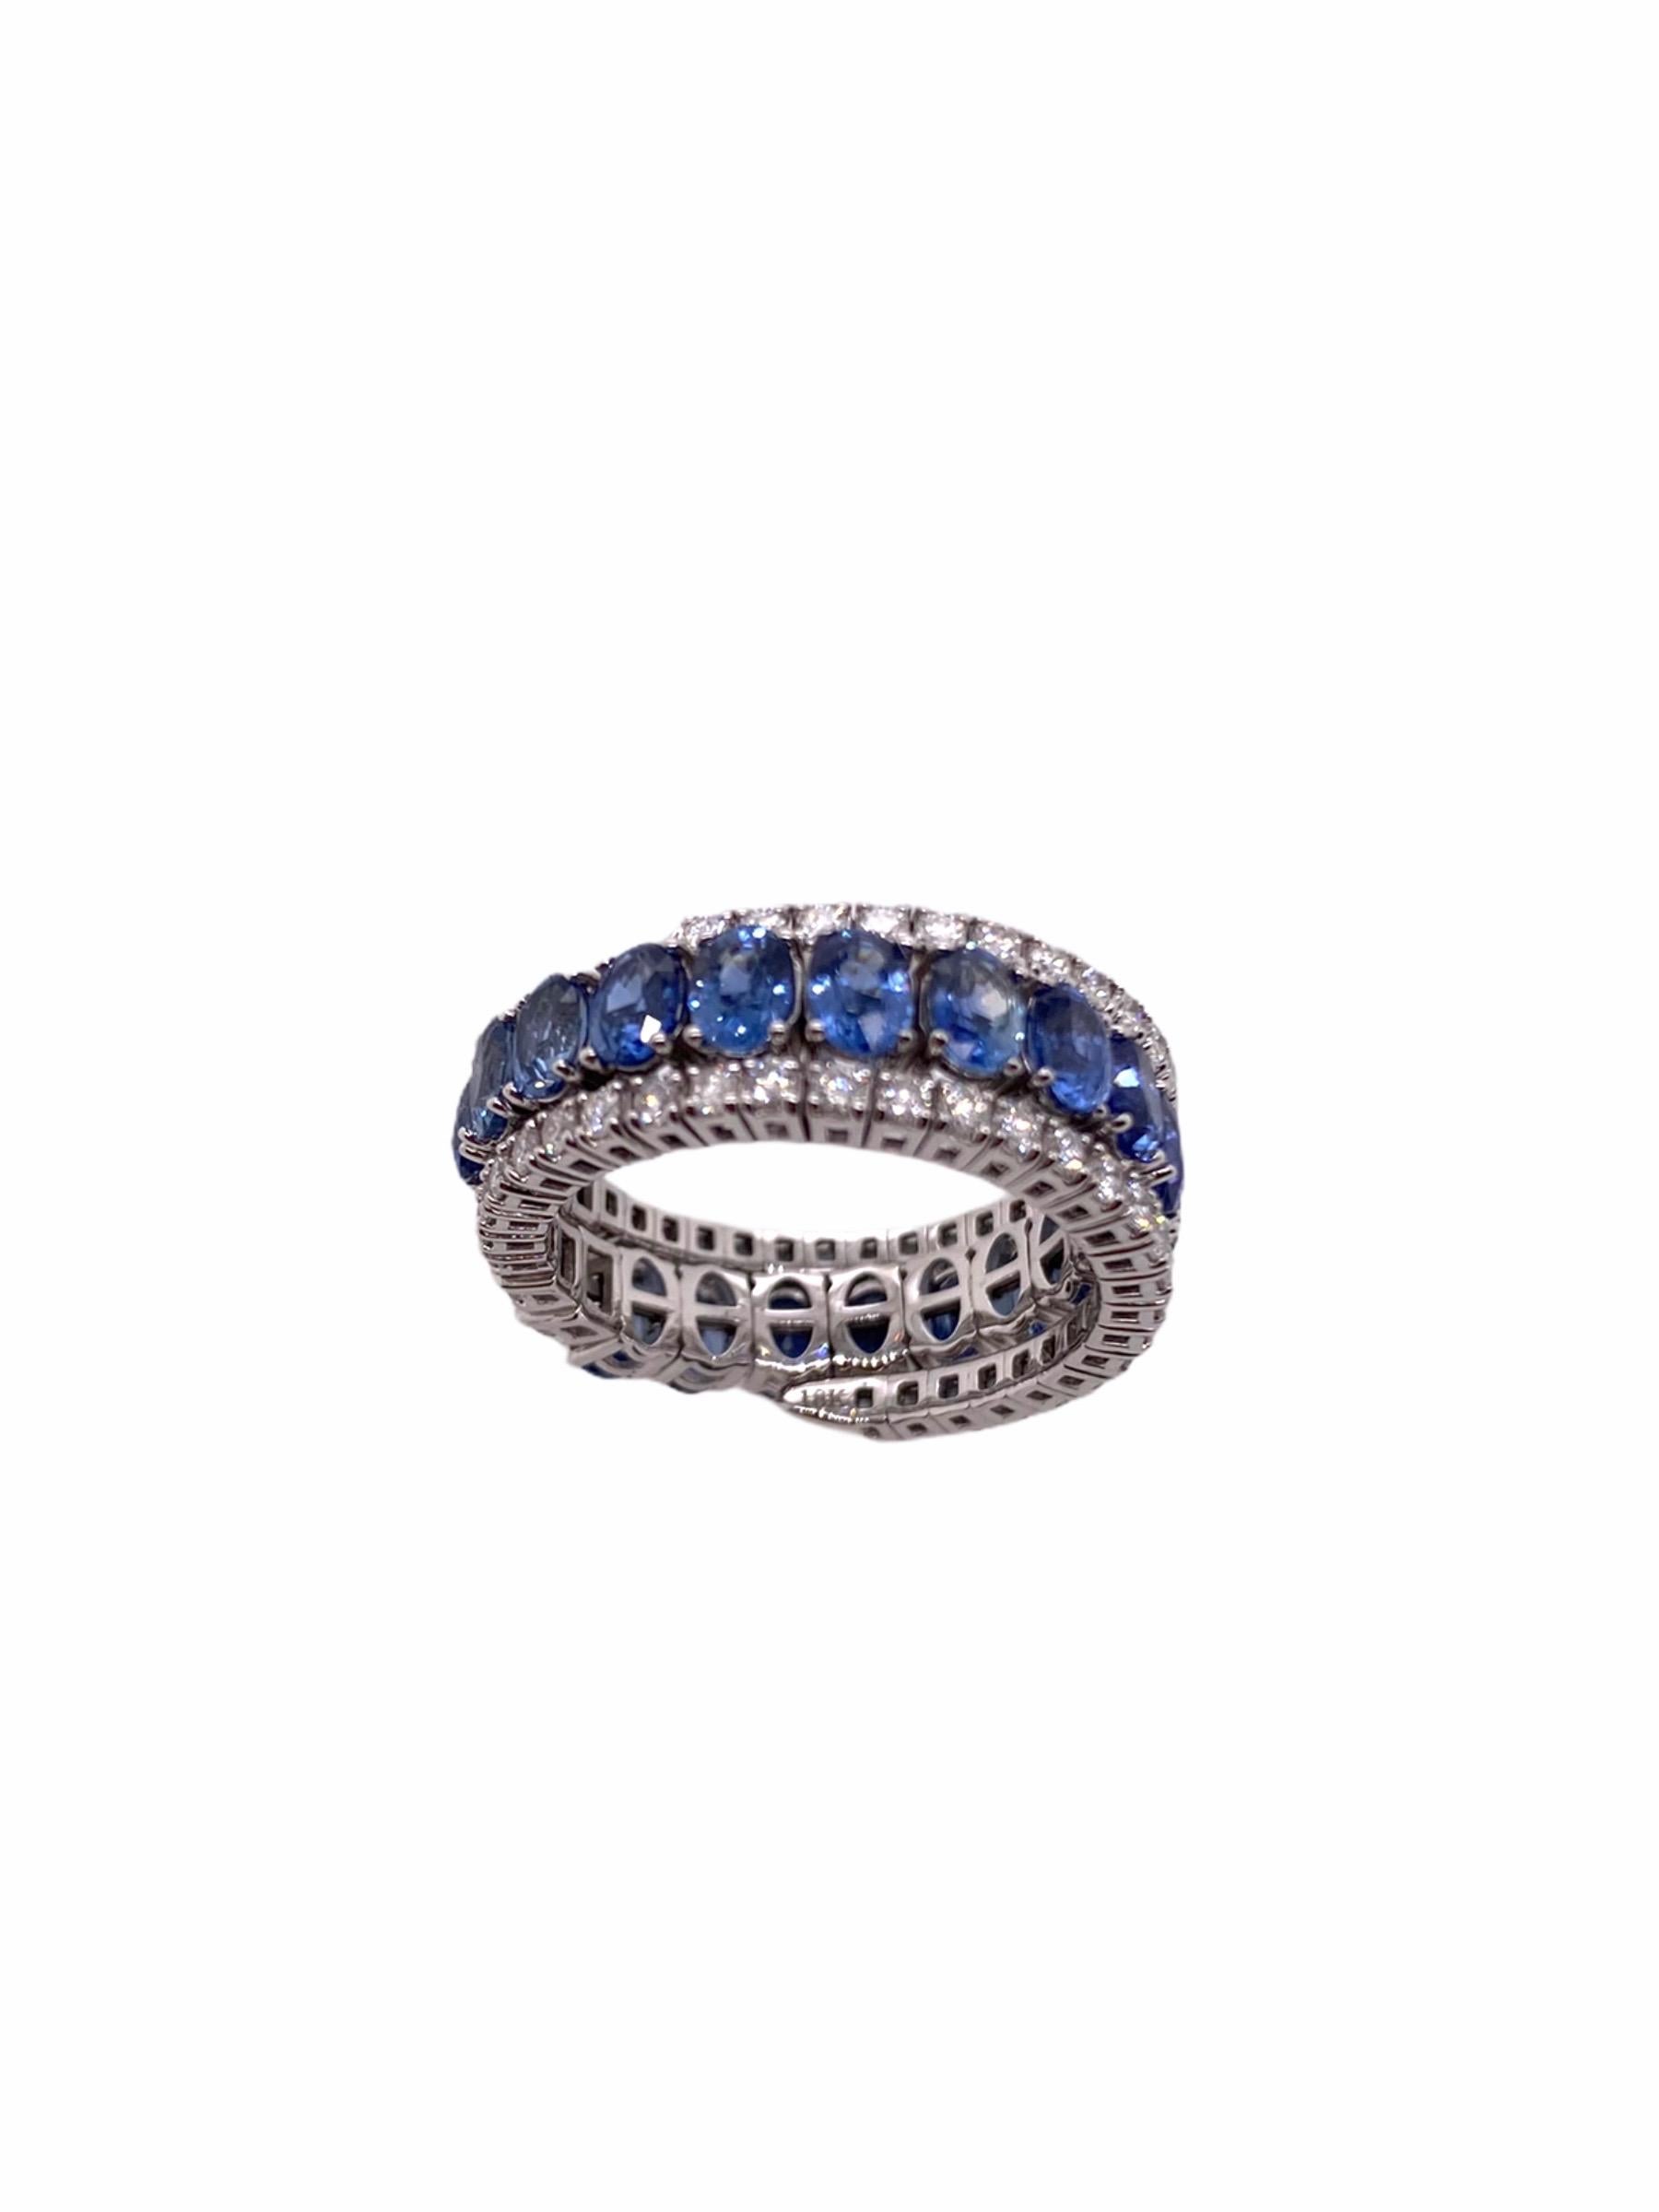 PARIS Craft House one-of-one Elastic Sapphire Diamond Band Ring. Historically, serpents have always represent fertility or a creative life force. The ouroboros is a symbol of eternity and continual renewal of life. Crafted in spiral loops this is